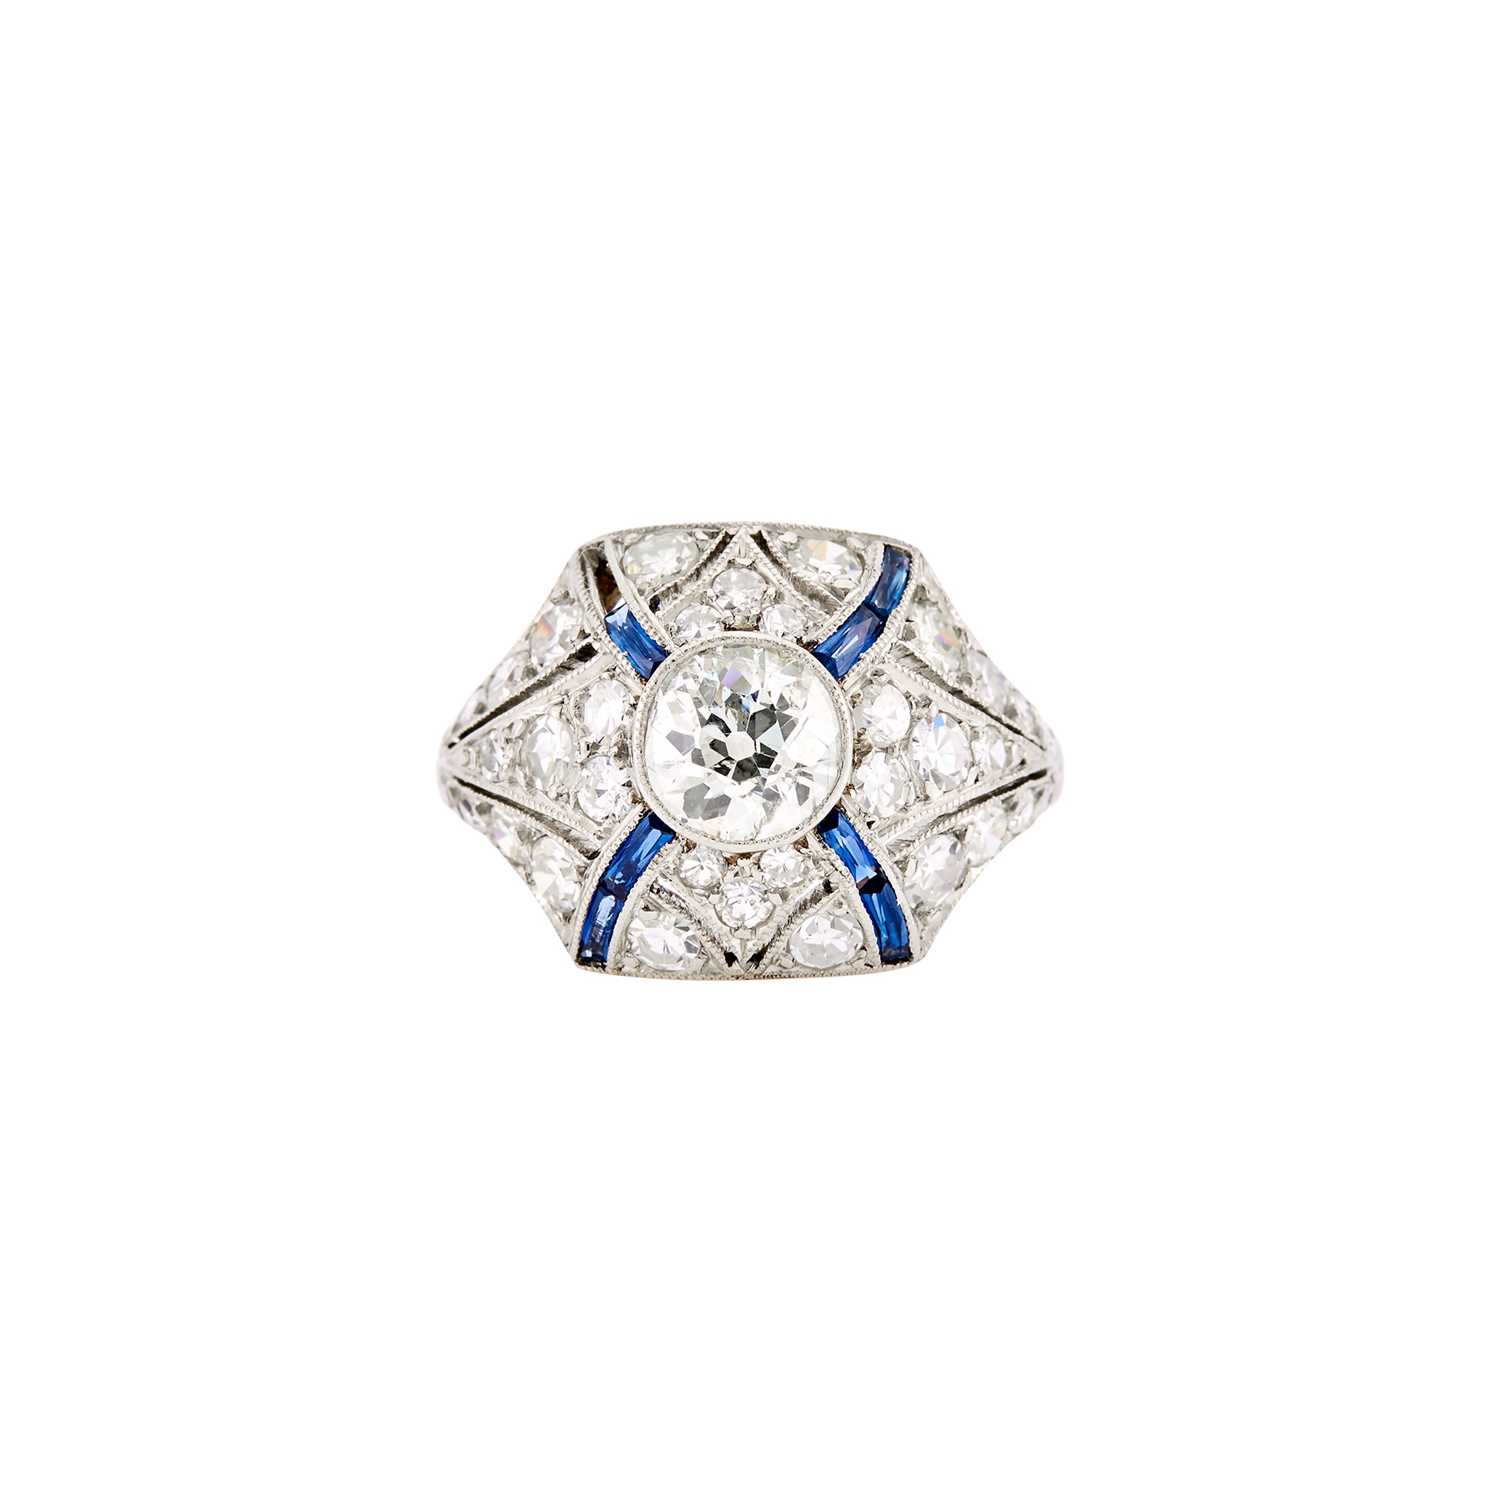 Lot 1180 - Platinum, Diamond and Synthetic Sapphire Ring